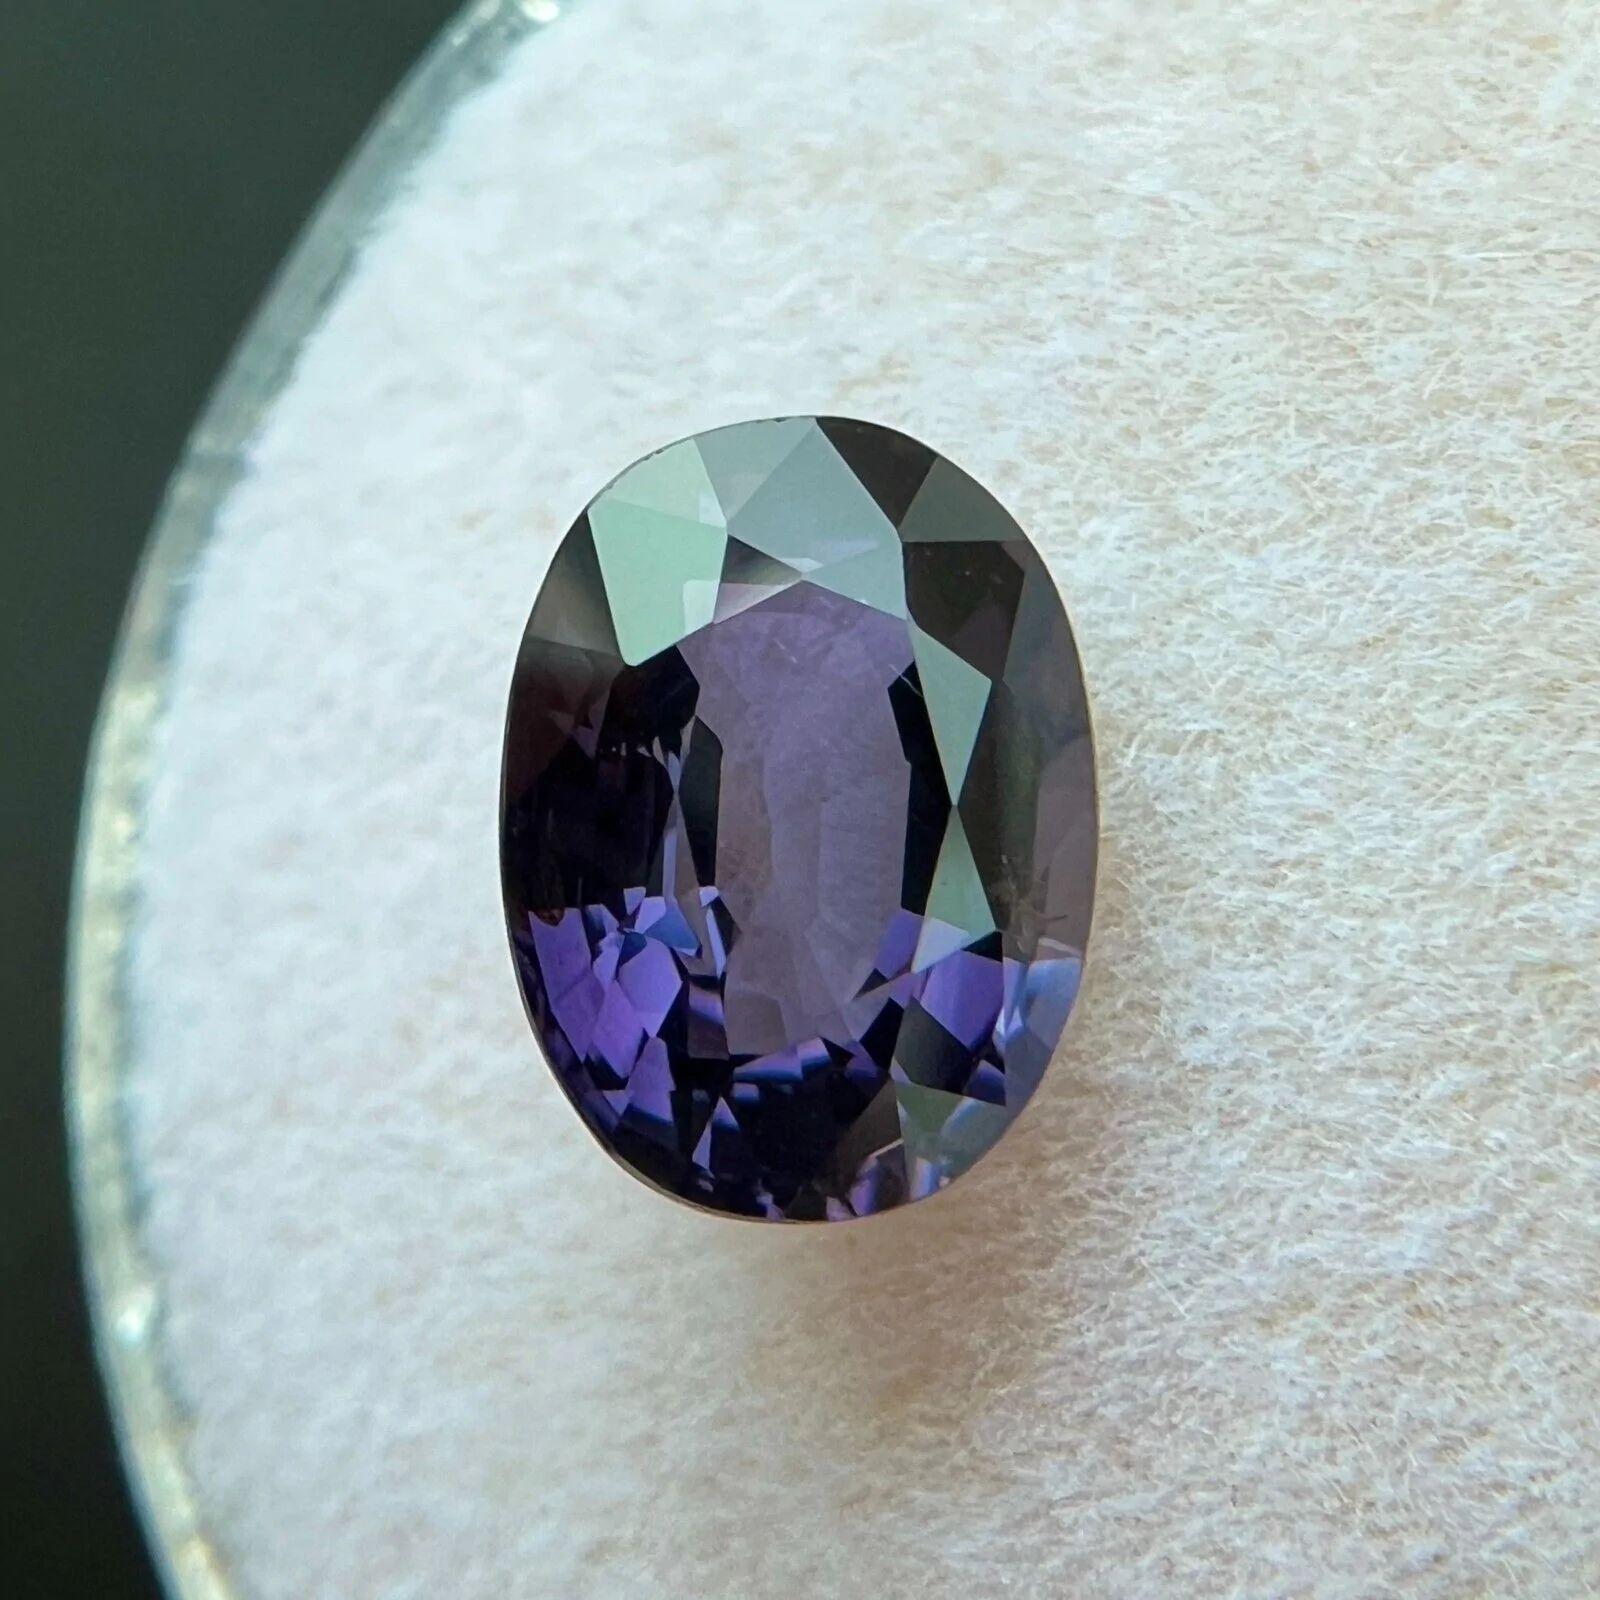 2.03ct Fine Deep Purple Spinel Natural Oval Cut 8.5x6.3mm Loose Rare Gem VS

Natural Deep Purple Spinel Gemstone.
Beautiful 2.03 Carat spinel with a deep purple colour. This spinel also has excellent clarity, VS.
A very clean stone with an excellent